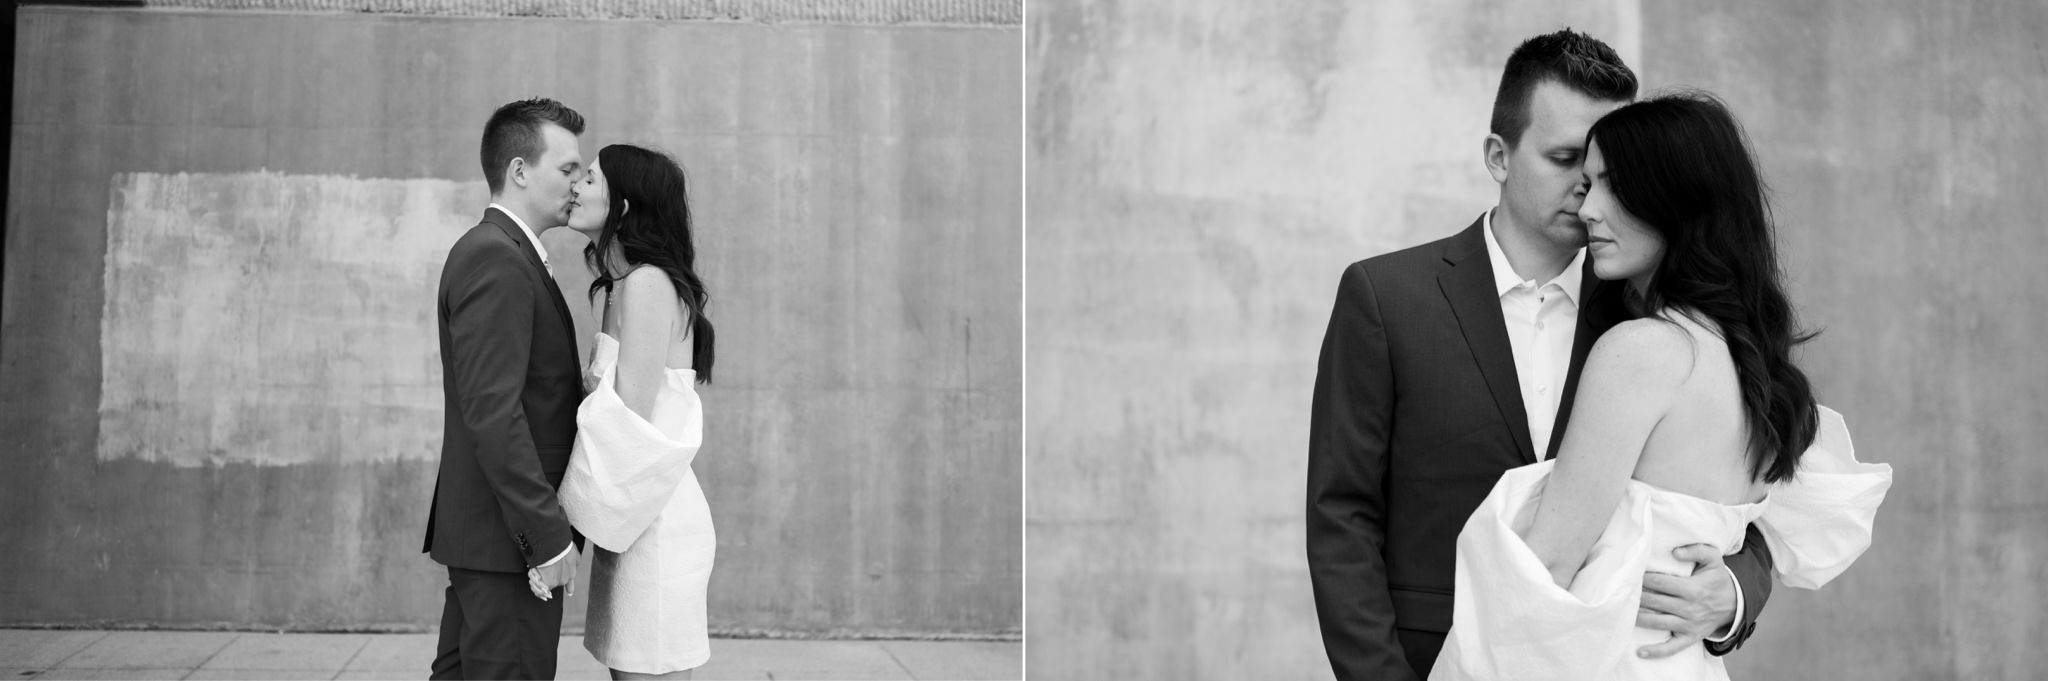 stunning black and white engagement photos des moines iowa